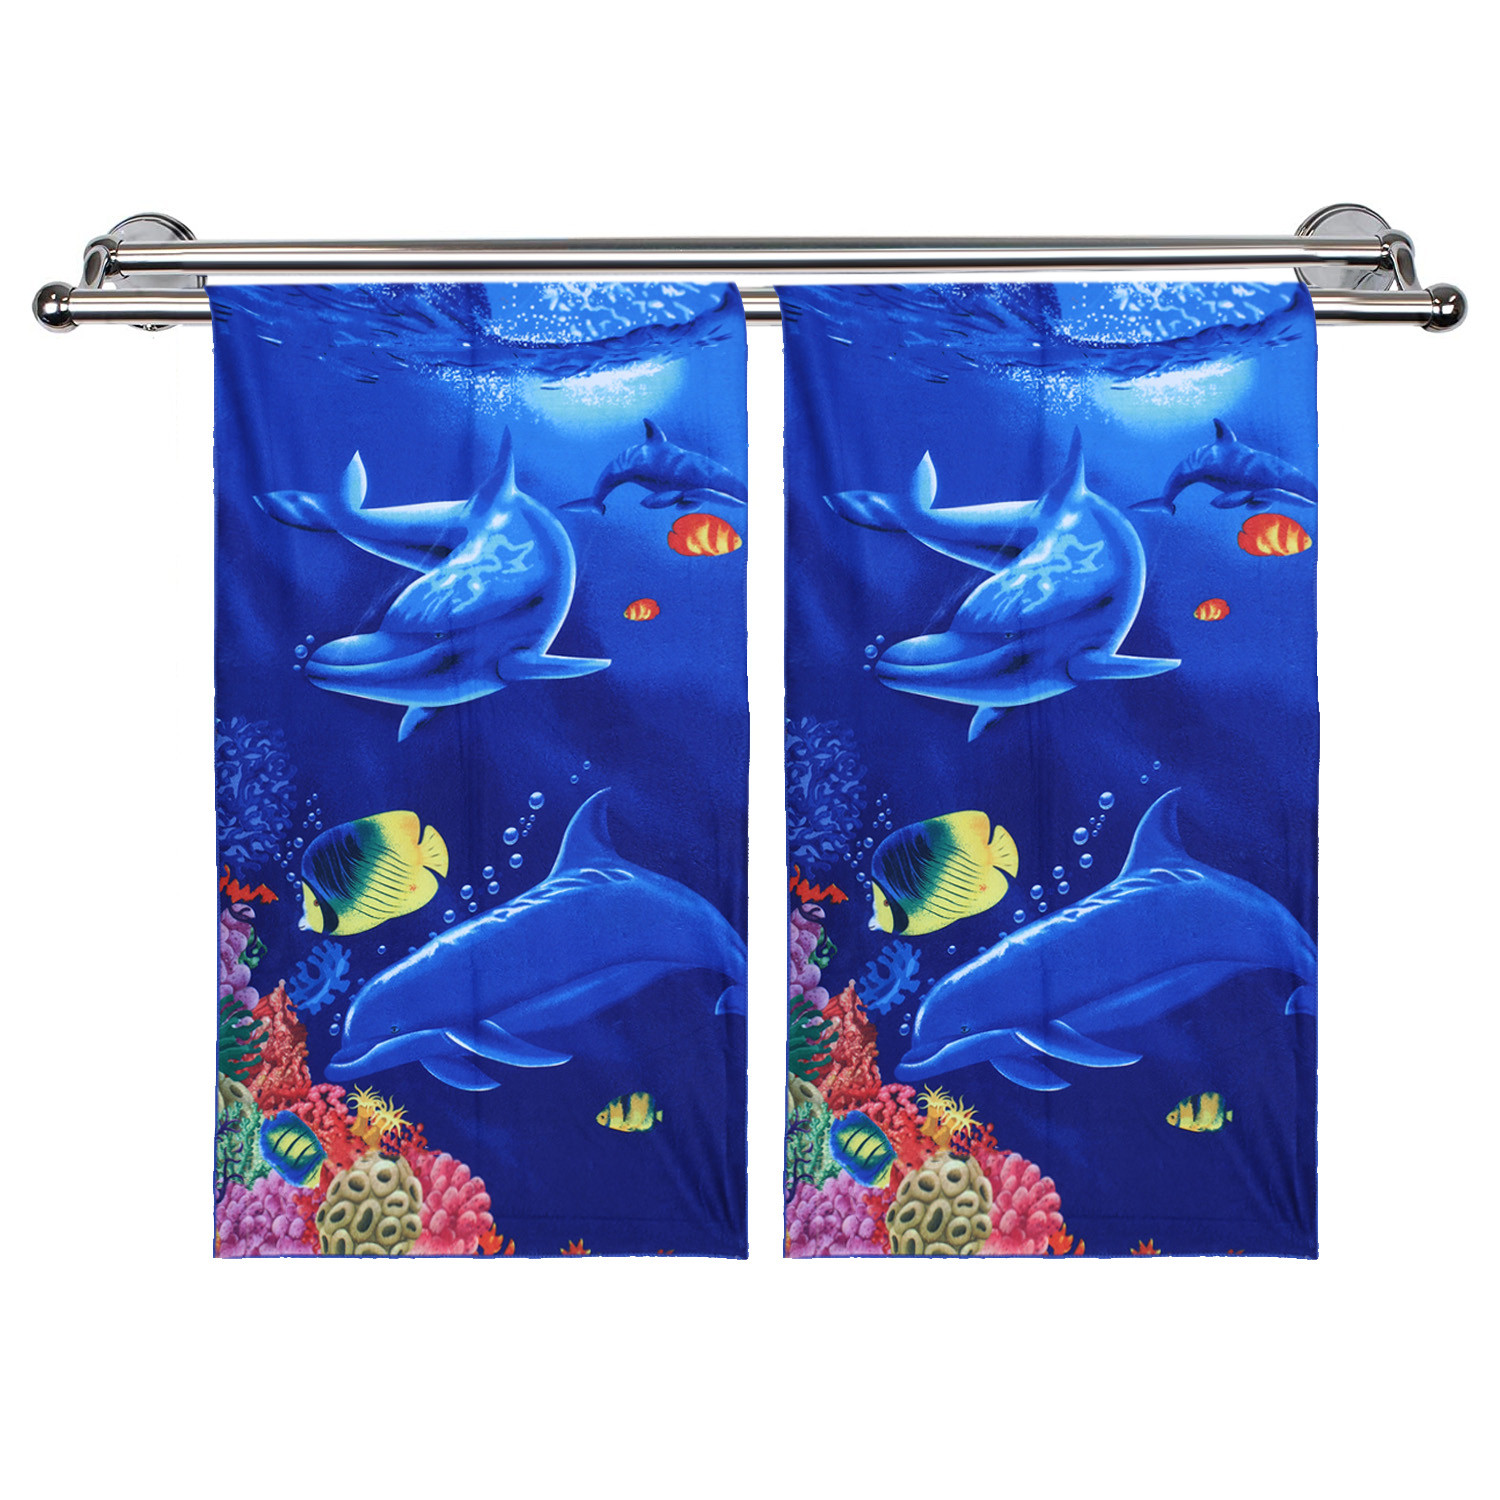 Kuber Industries Kids Bath Towel|Soft Cotton & Sides Stitched Baby Towel|Microfibered Super Absorbent Aquarium Pattern Towel for Infants,Toddler,55x26 Inch (Navy Blue)